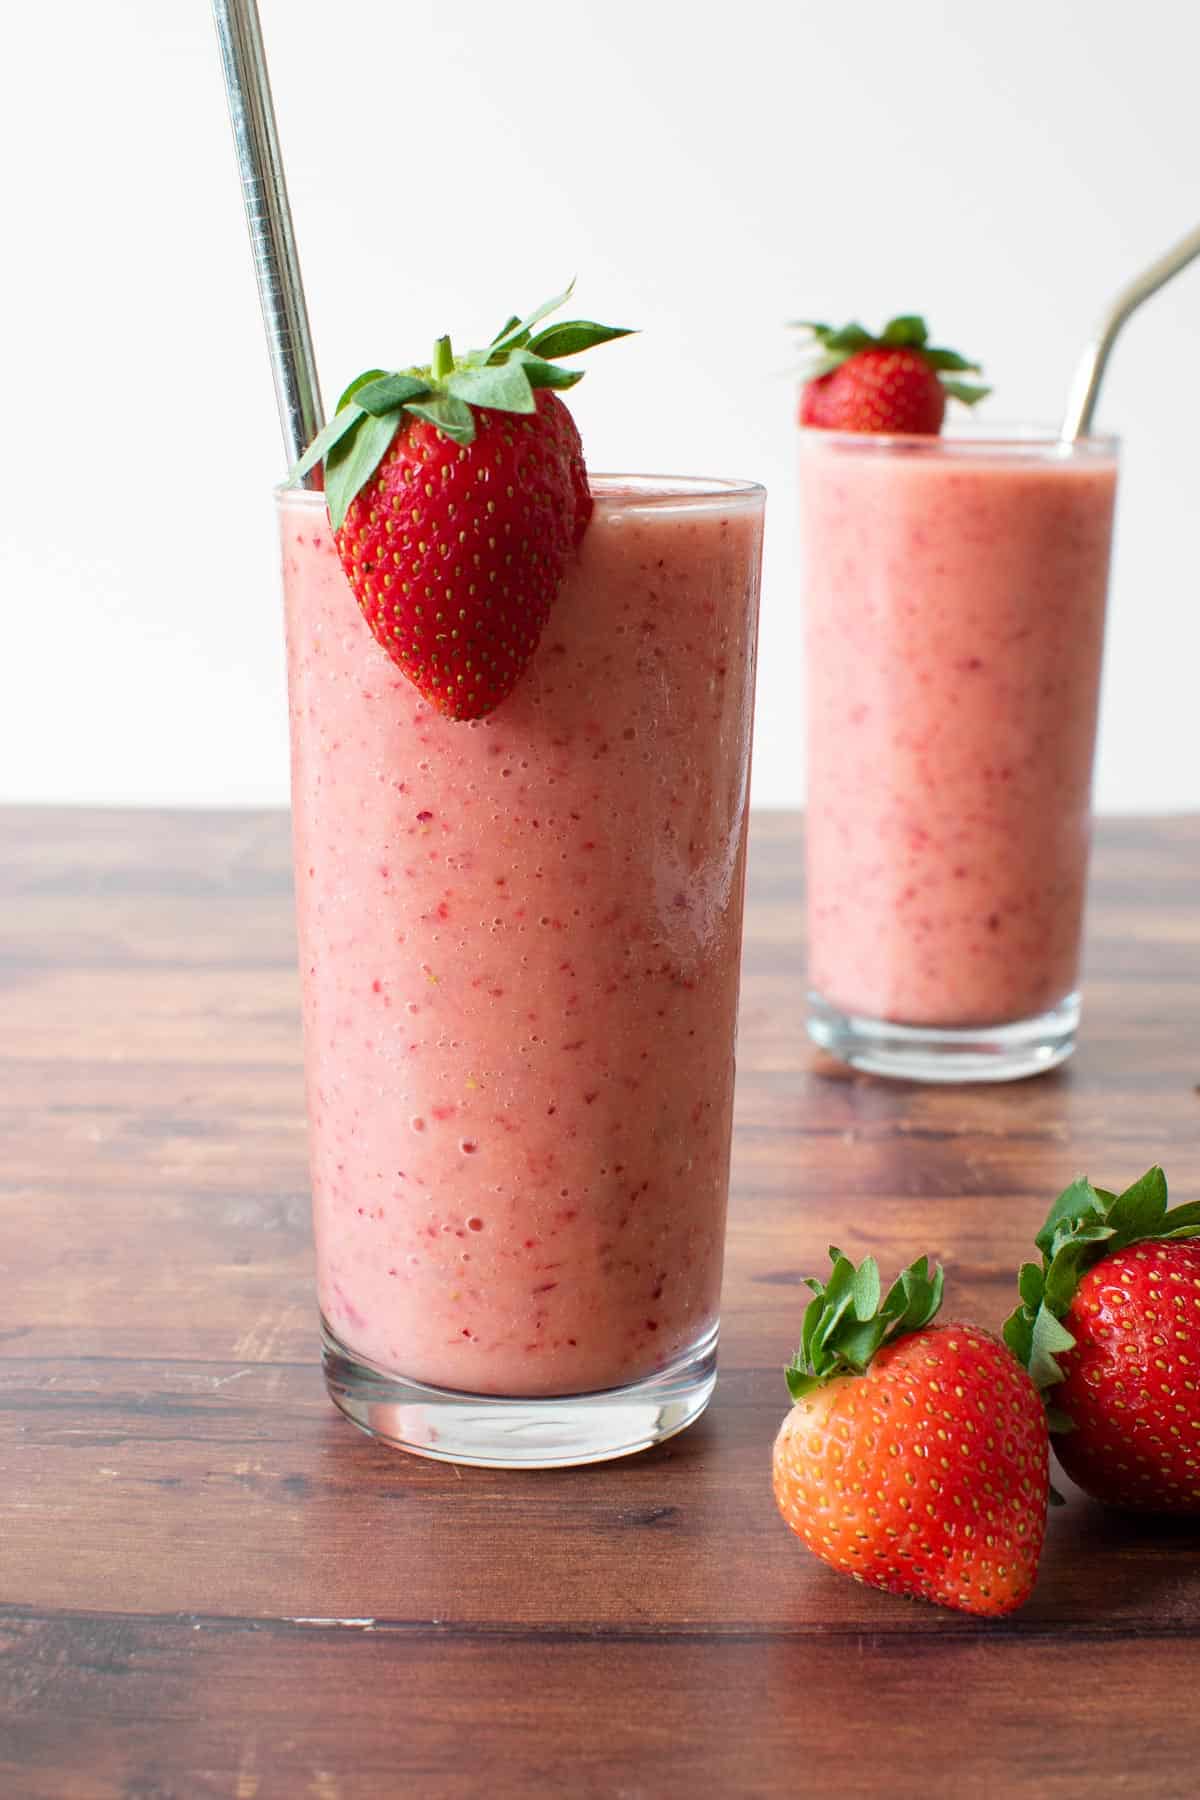 Two glasses of peach and strawberry smoothie, decorated with fresh strawberries.